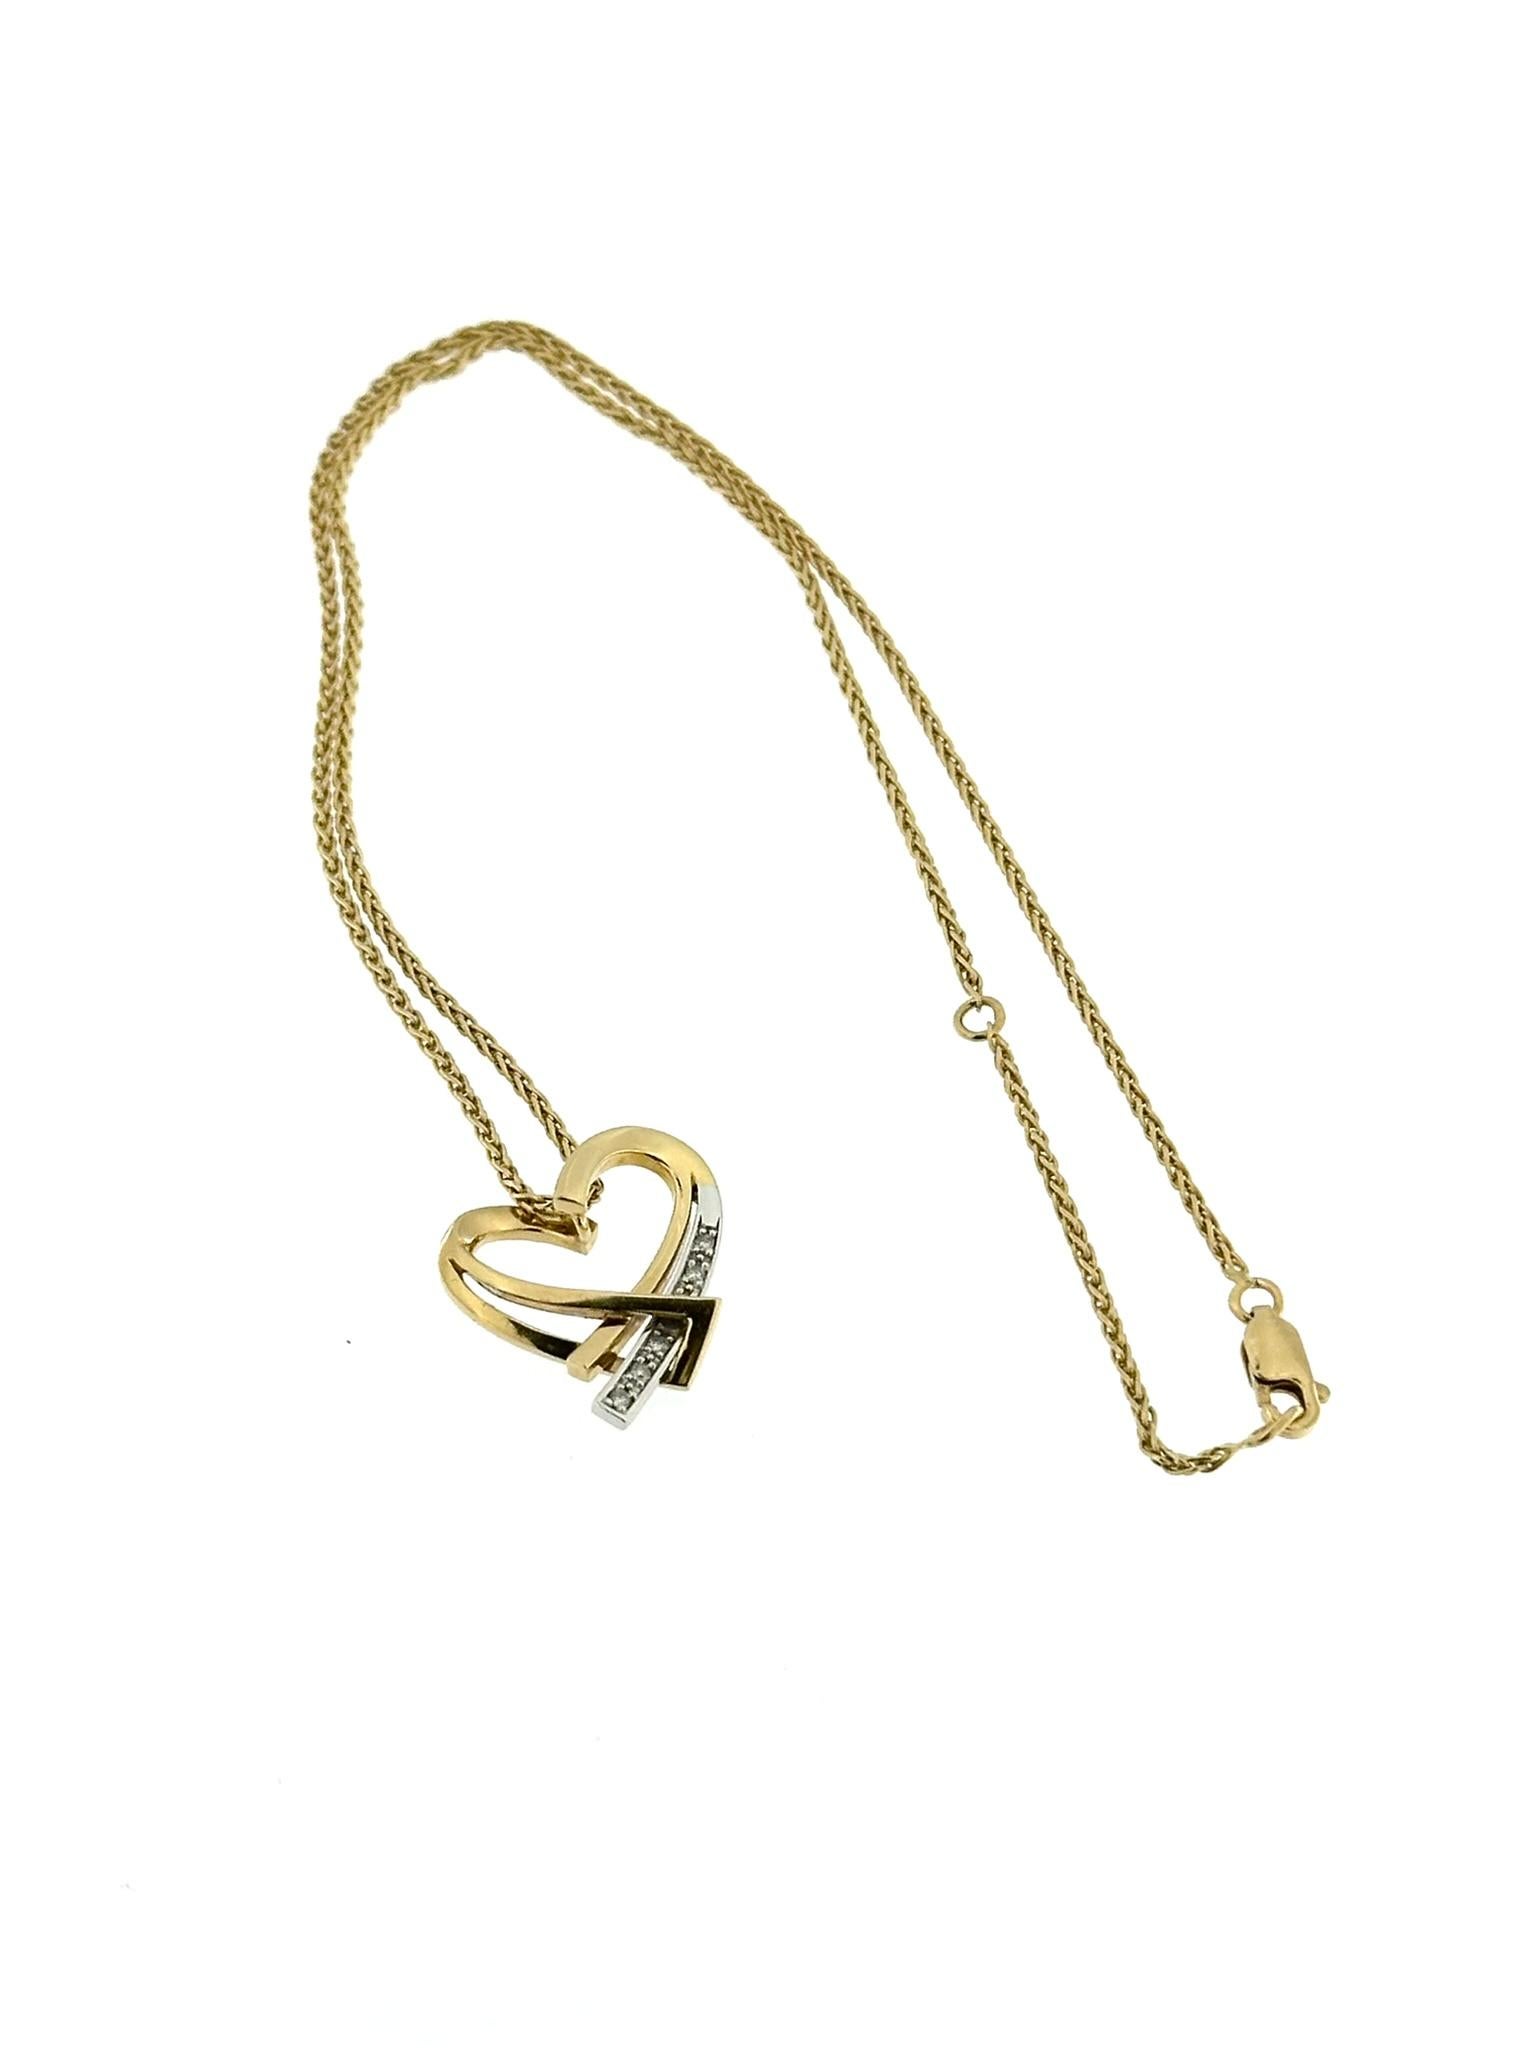 The Guy Laroche Heart Pendant with Chain is a stunning piece of jewelry designed to capture attention and evoke emotions. Crafted from 18kt yellow and white gold, this pendant embodies elegance and sophistication.

The heart-shaped design symbolizes